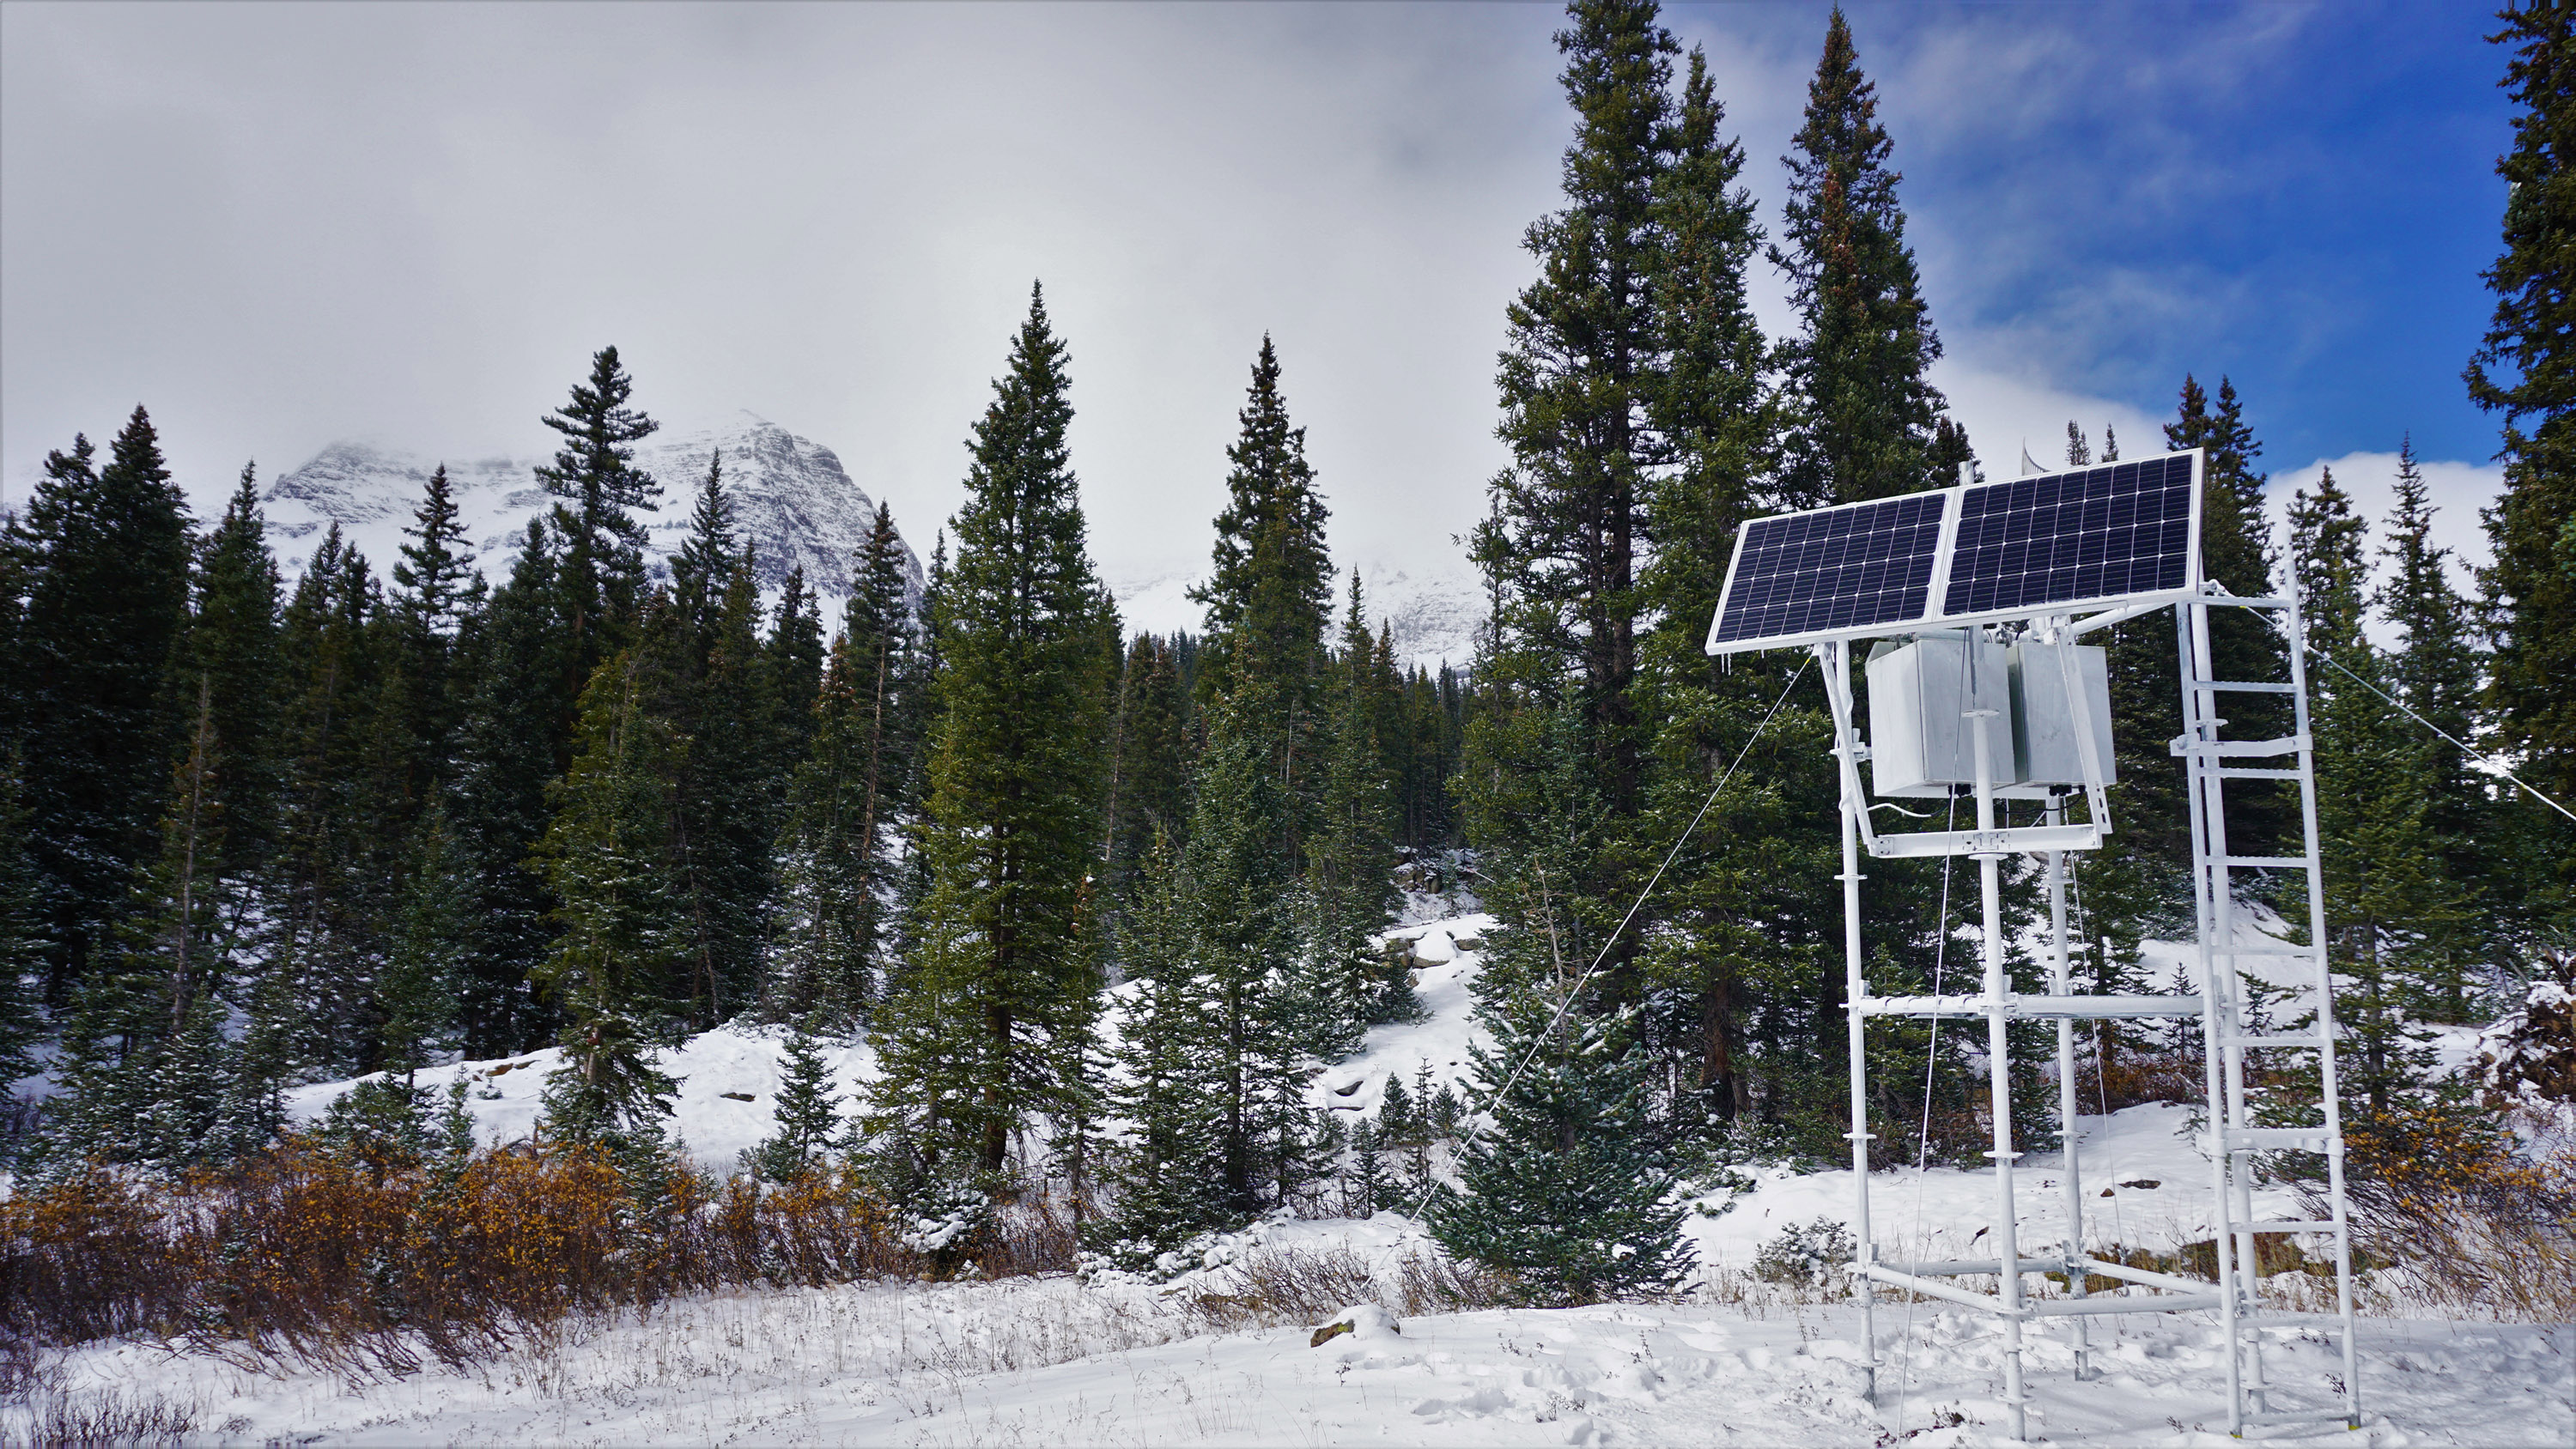 SAIL-NET’s aerosol-cloud interaction instrument arrays must be self-powered and robust enough to withstand winter conditions in the Rocky Mountains. Photo is courtesy of Anna Hodshire.